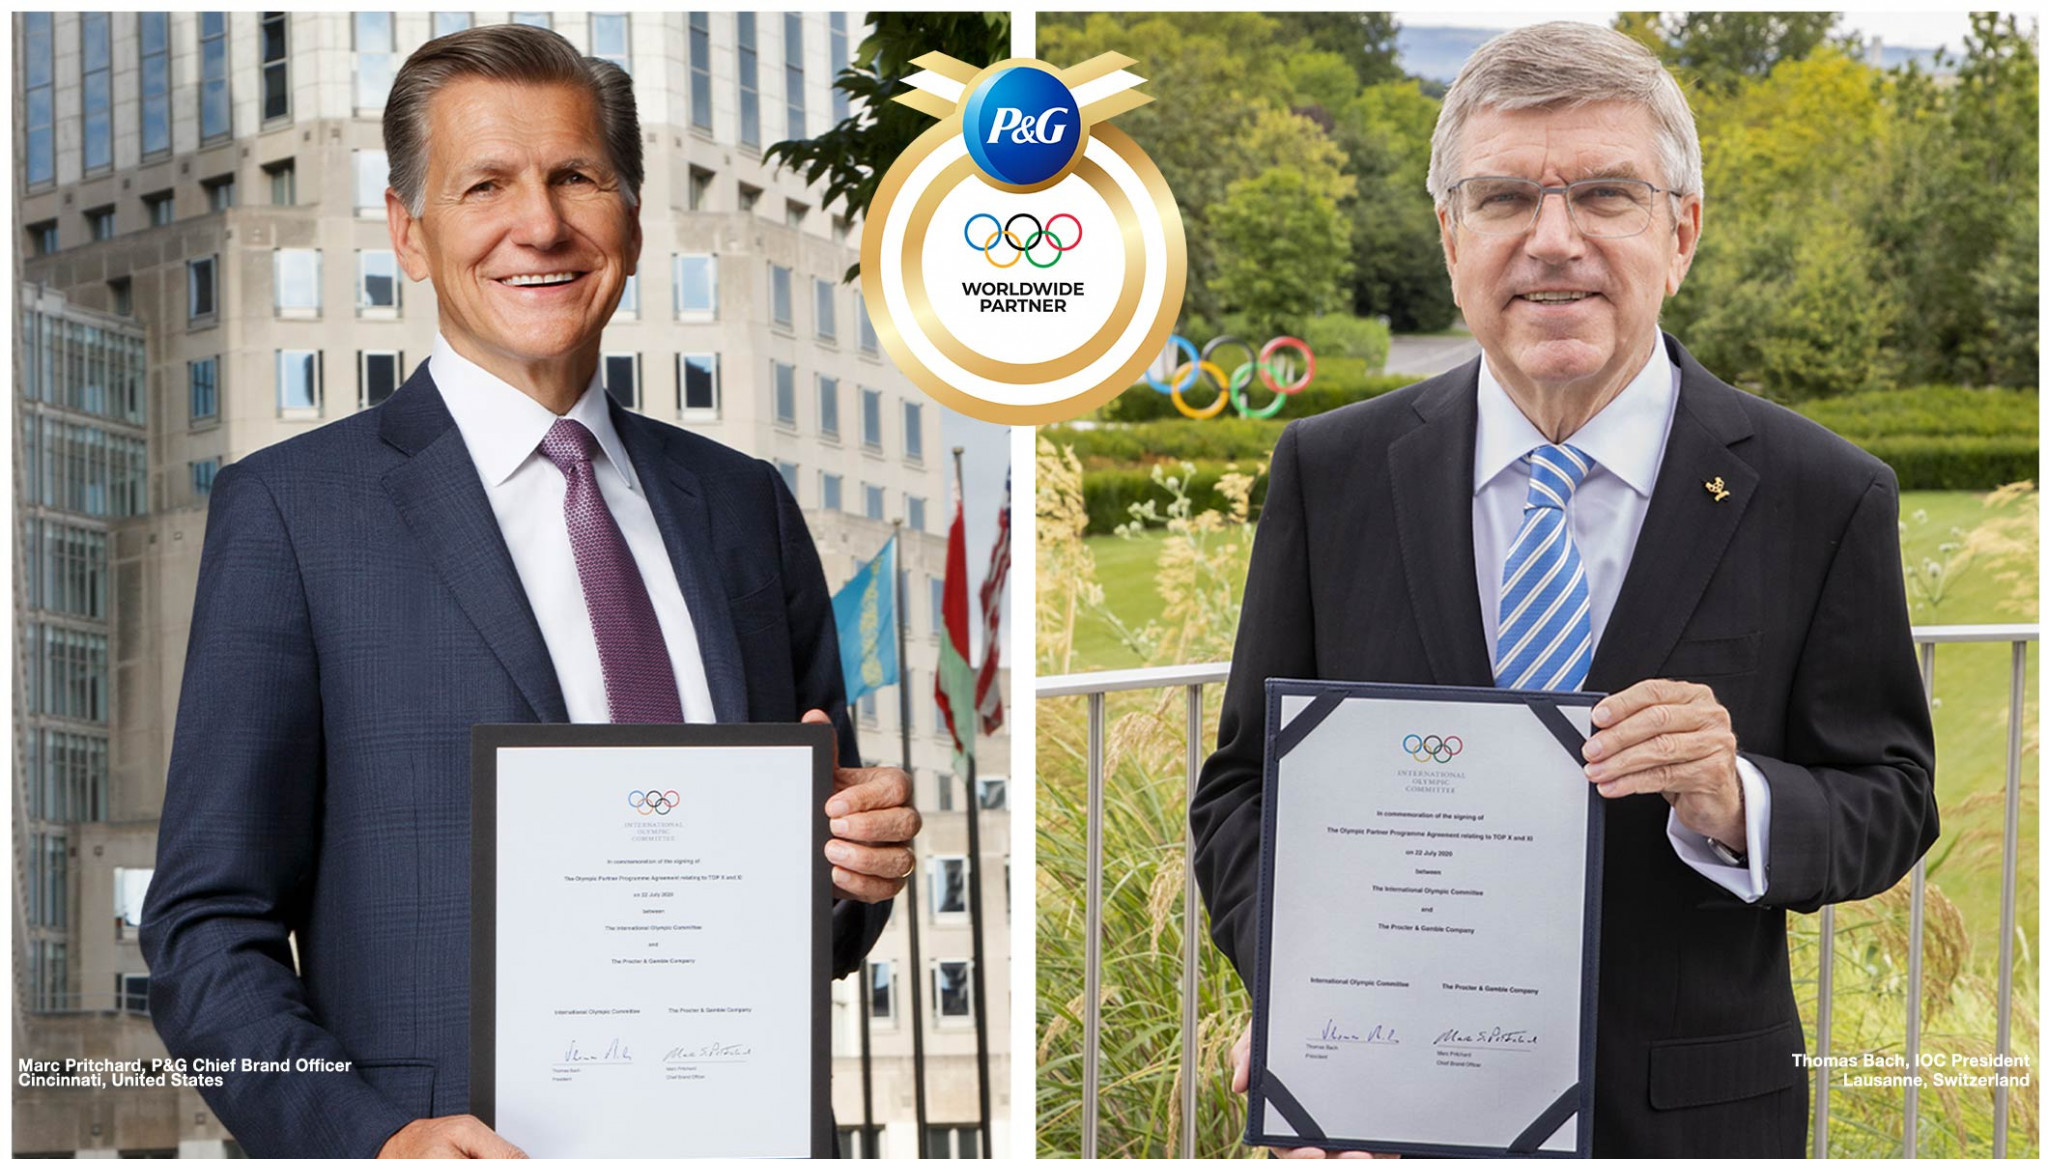 The deal between the IOC and Procter & Gamble has been extended through to 2028 ©IOC